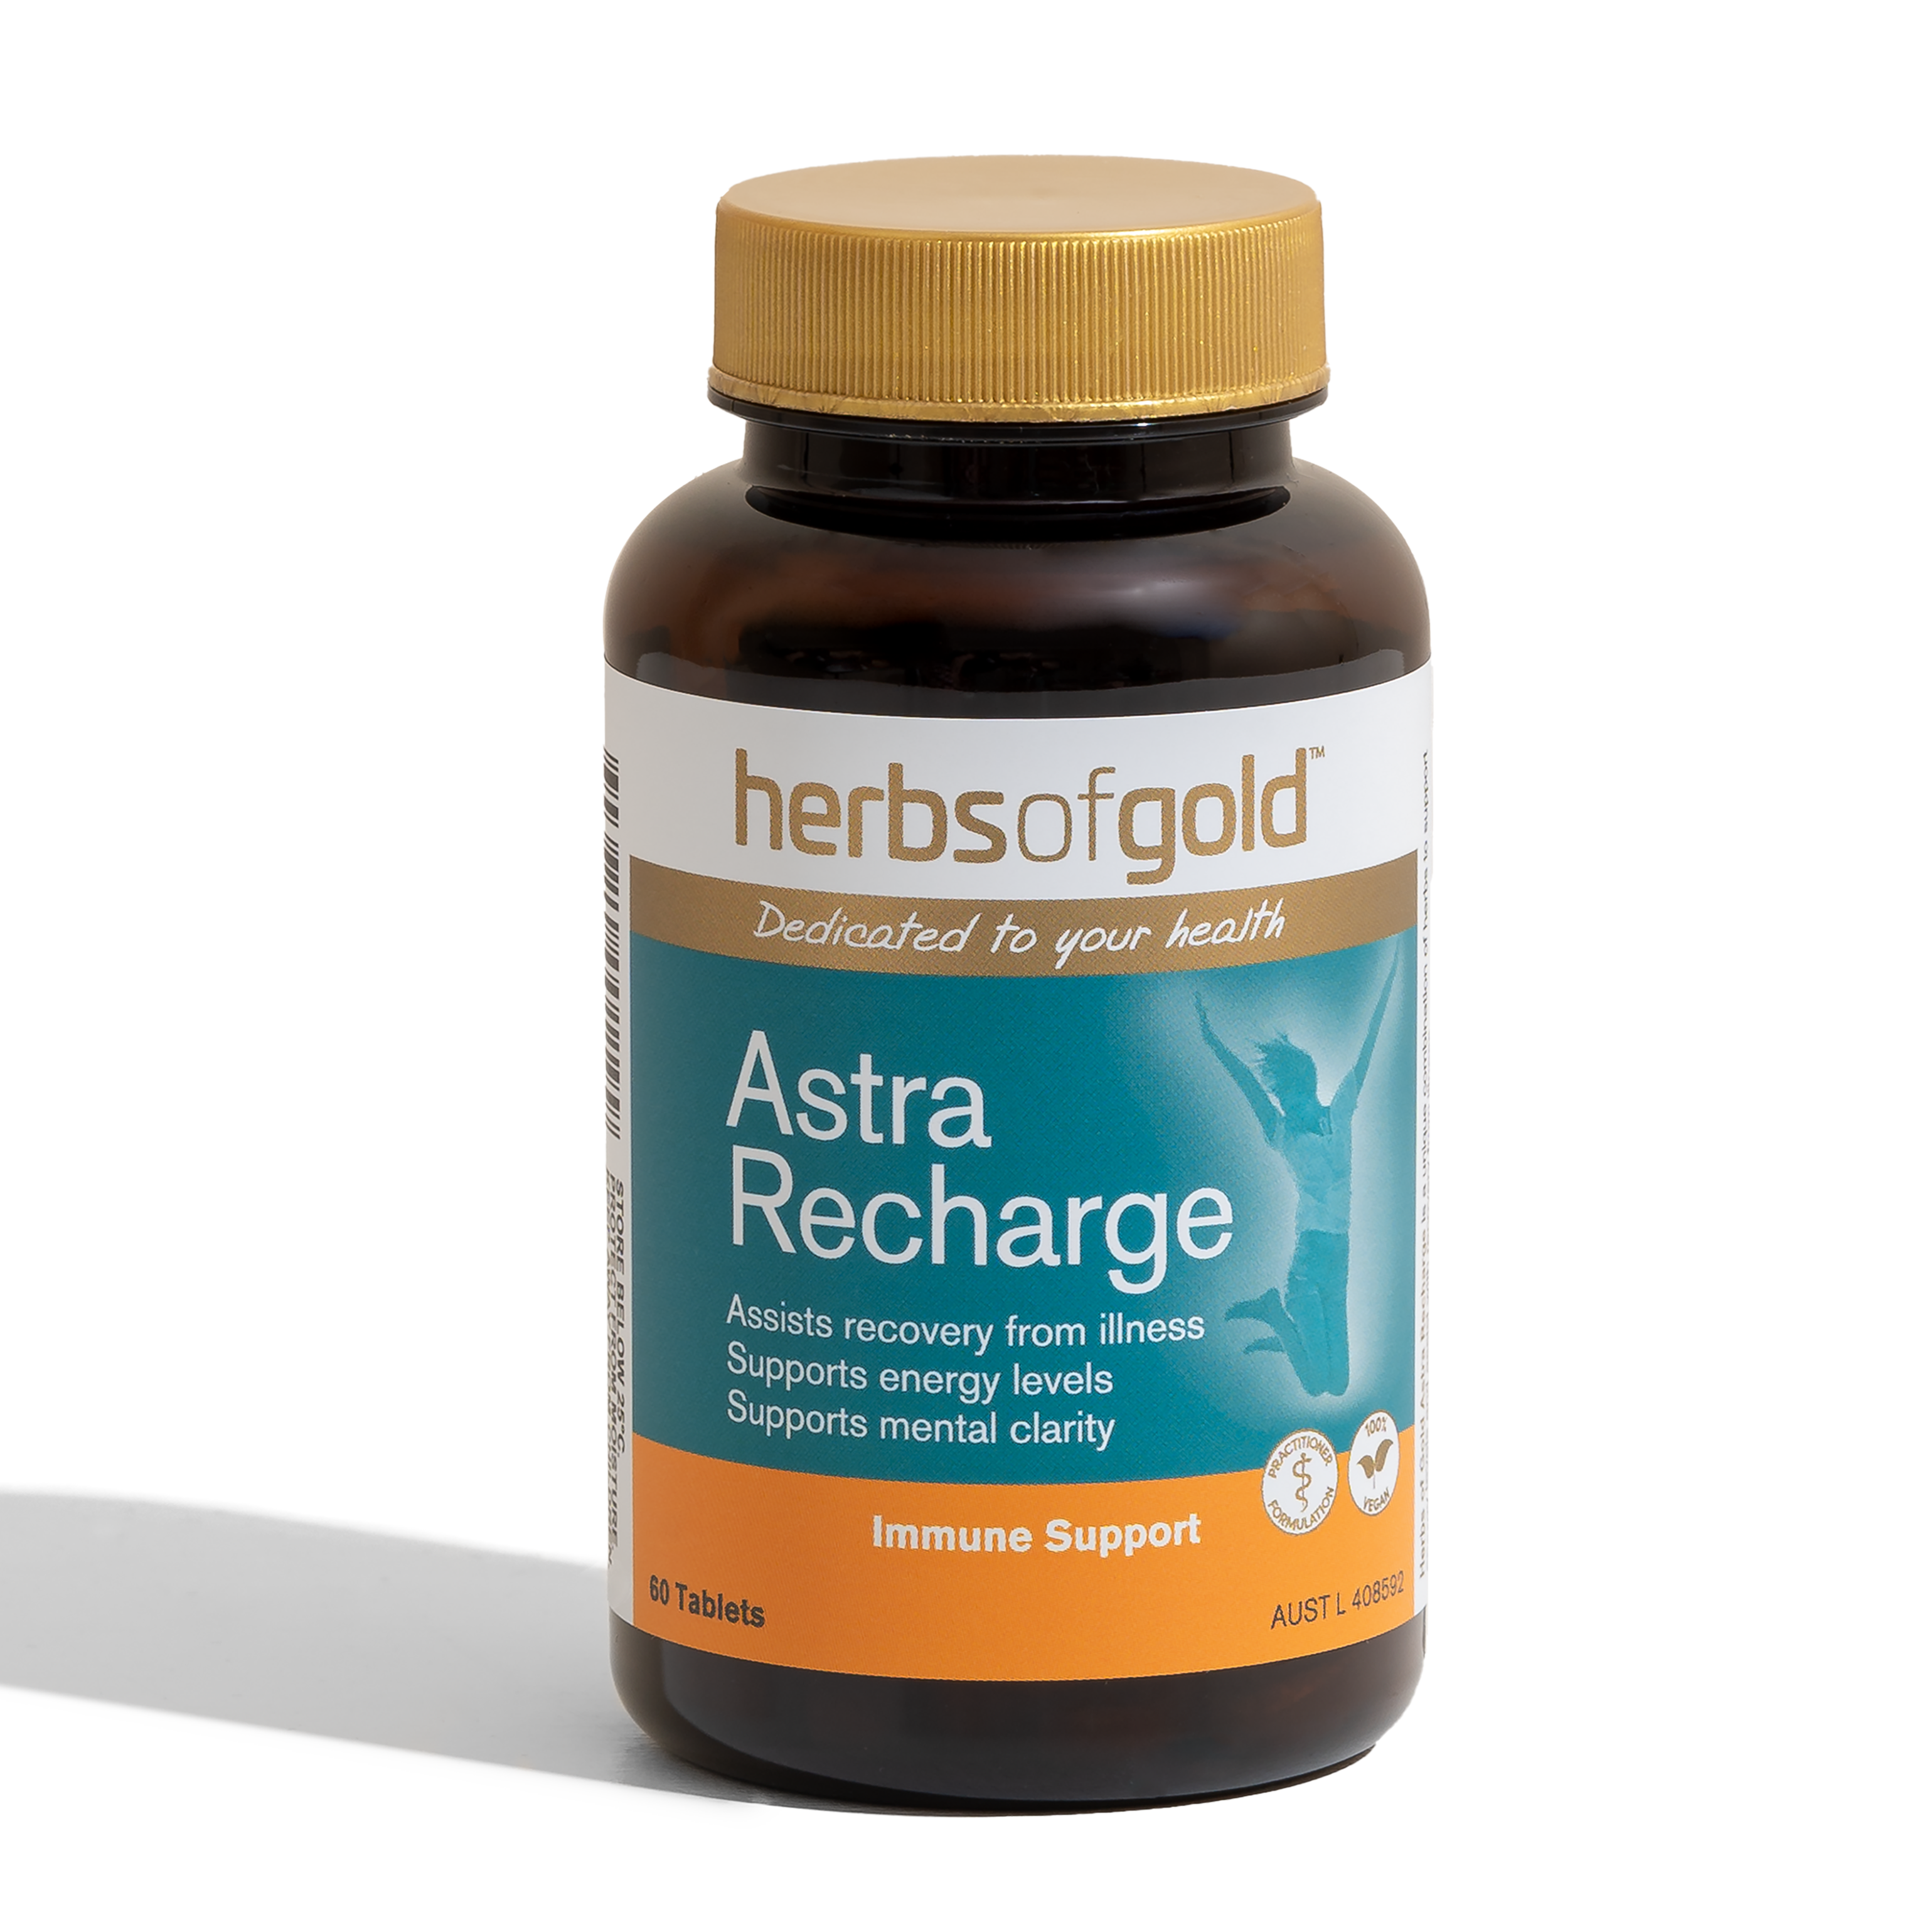 Astra Recharge